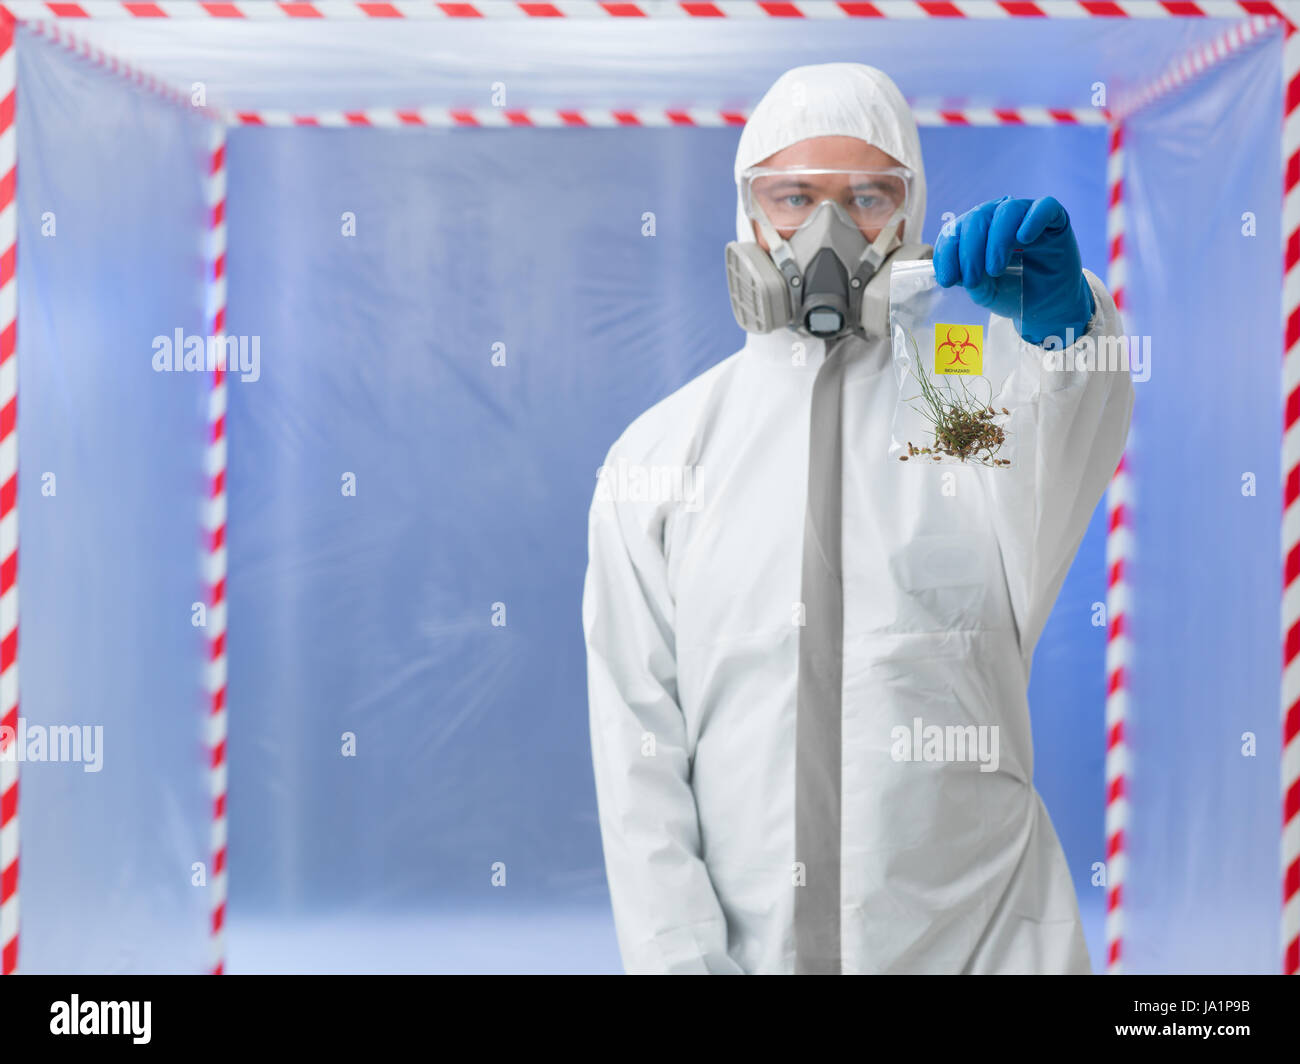 education, health, medicinally, medical, experiment, risk, science, research, Stock Photo